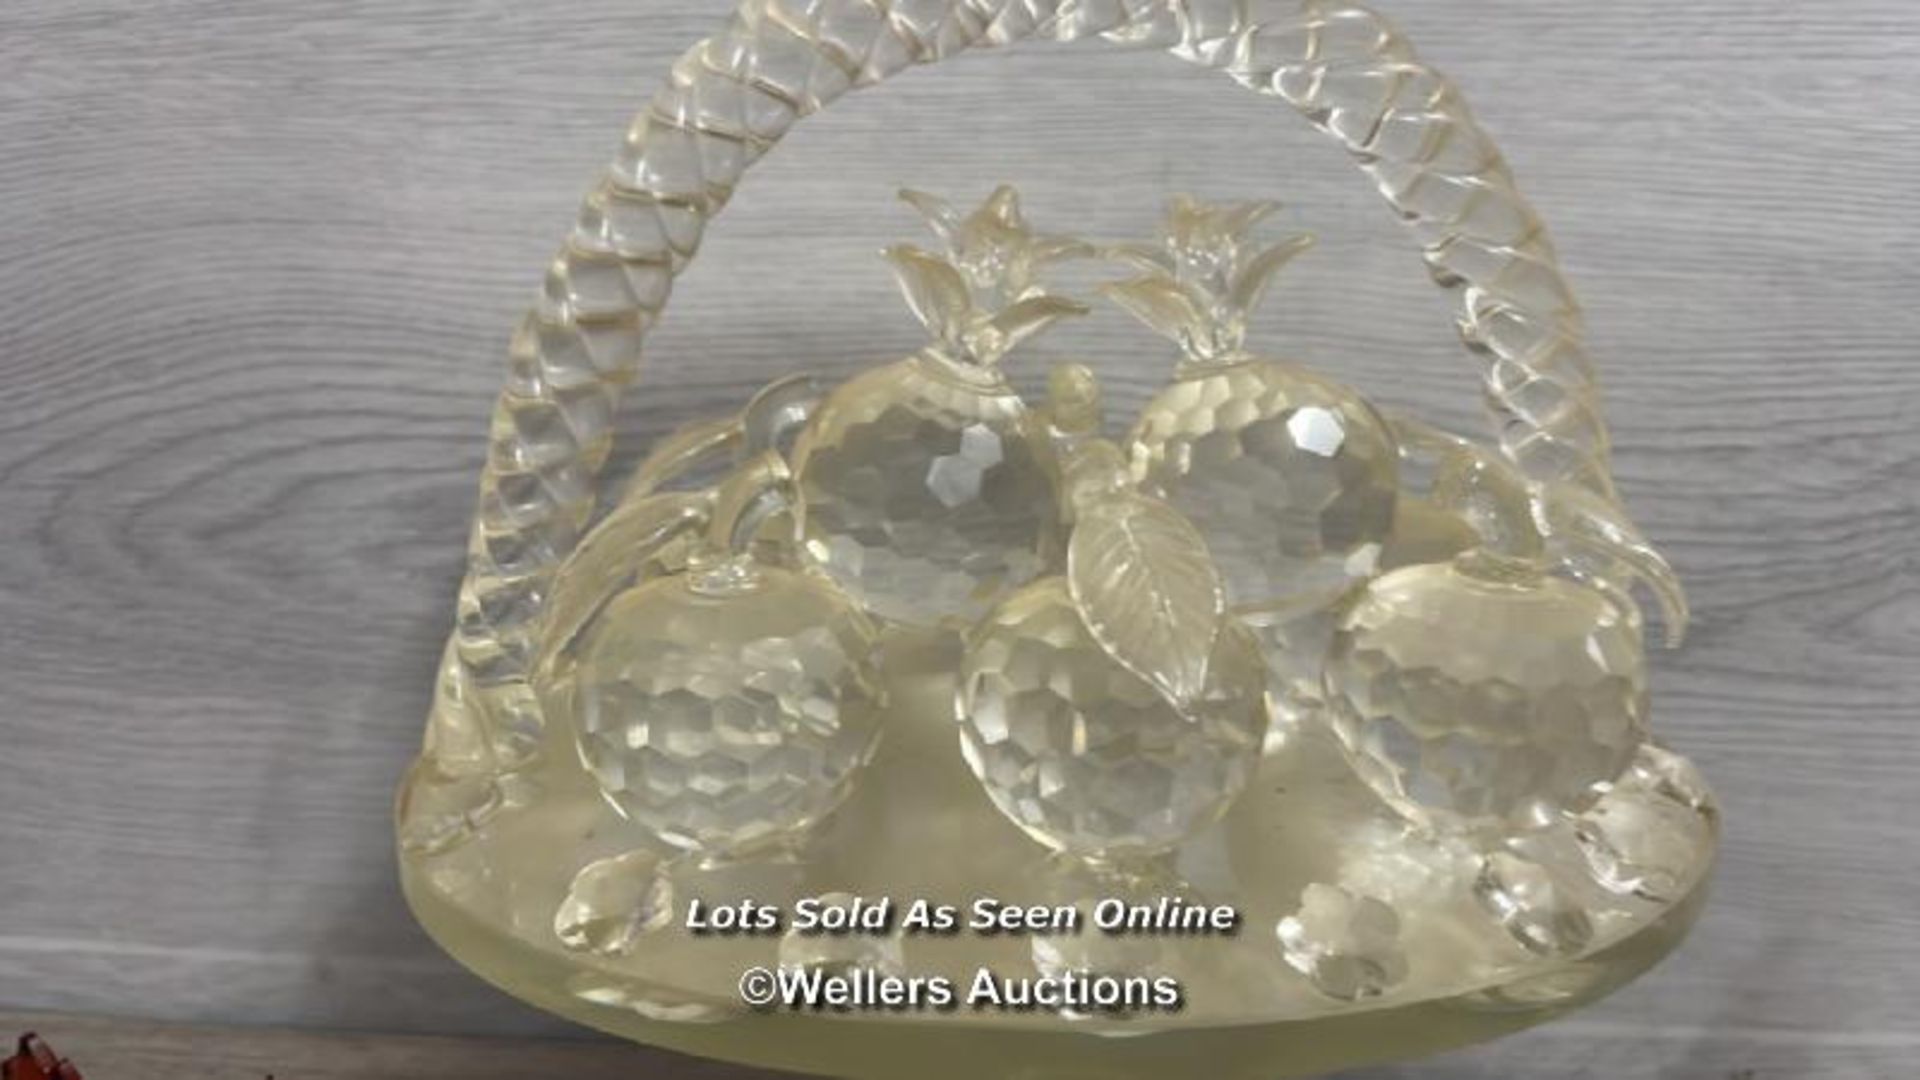 CUT GLASS FRUIT AND ANIMAL ORNAMENTS (7) - Image 2 of 4